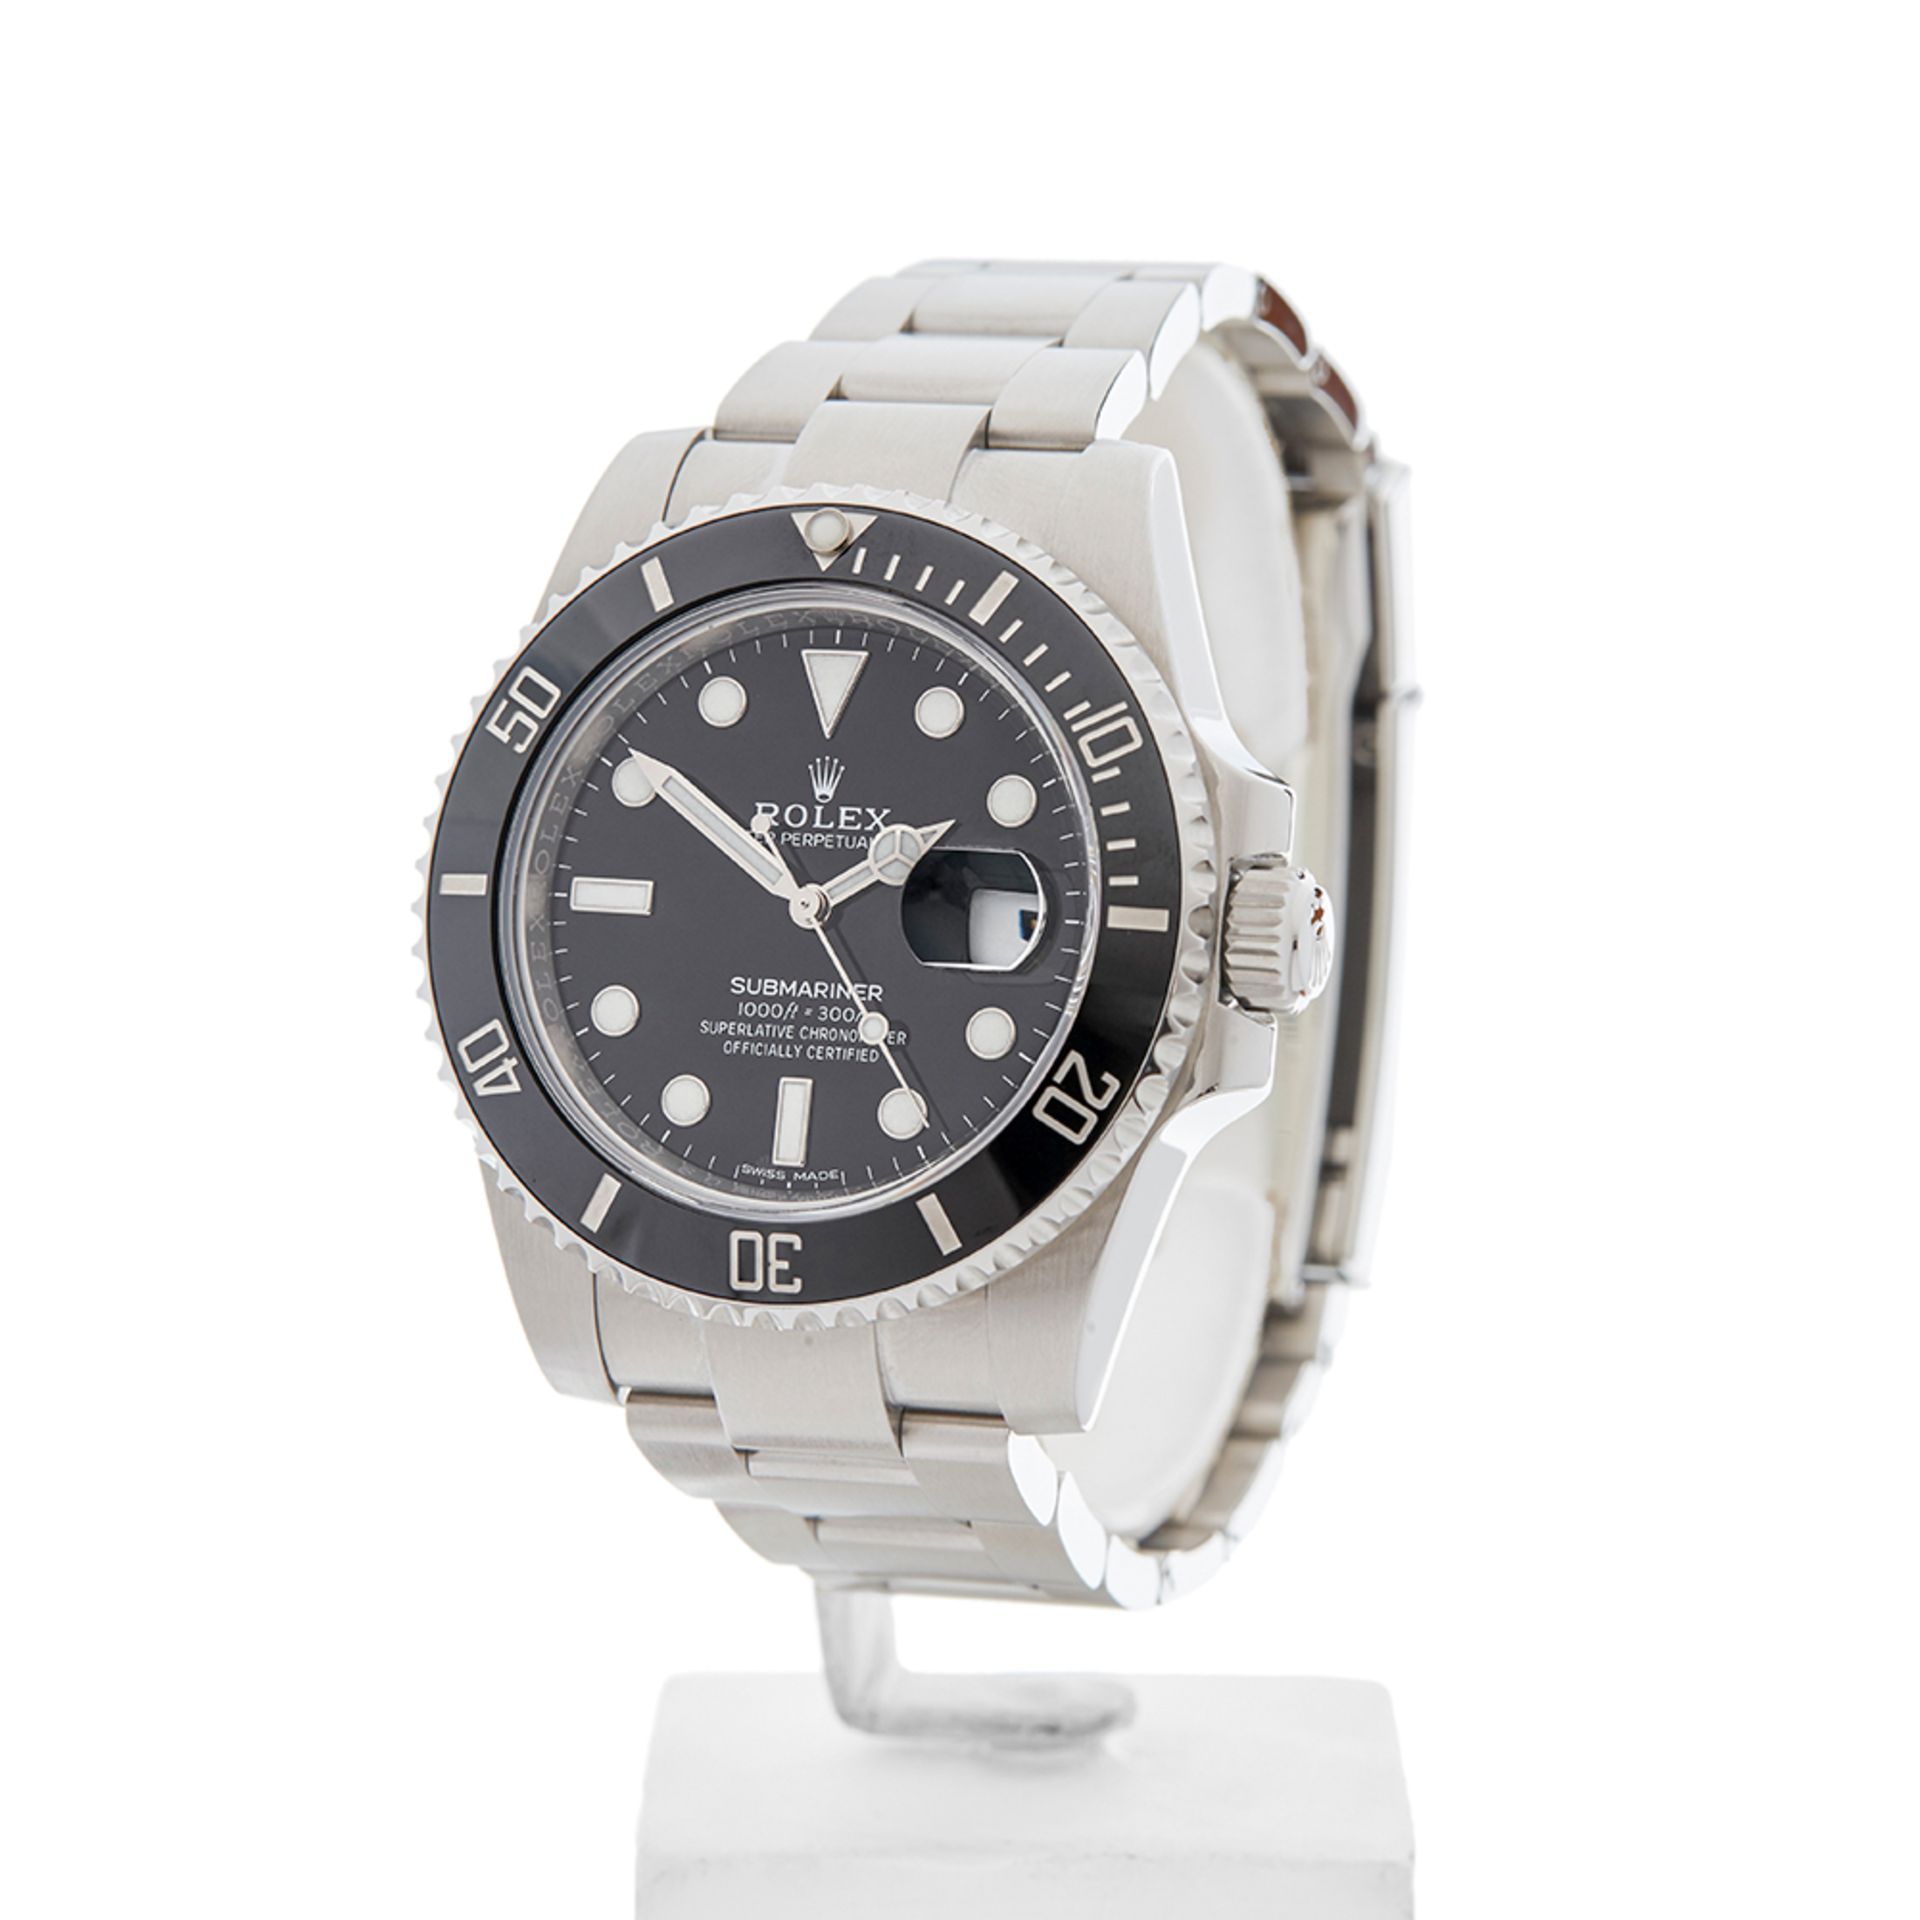 Rolex, Submariner Date 40mm Stainless Steel 116610LN - Image 3 of 8